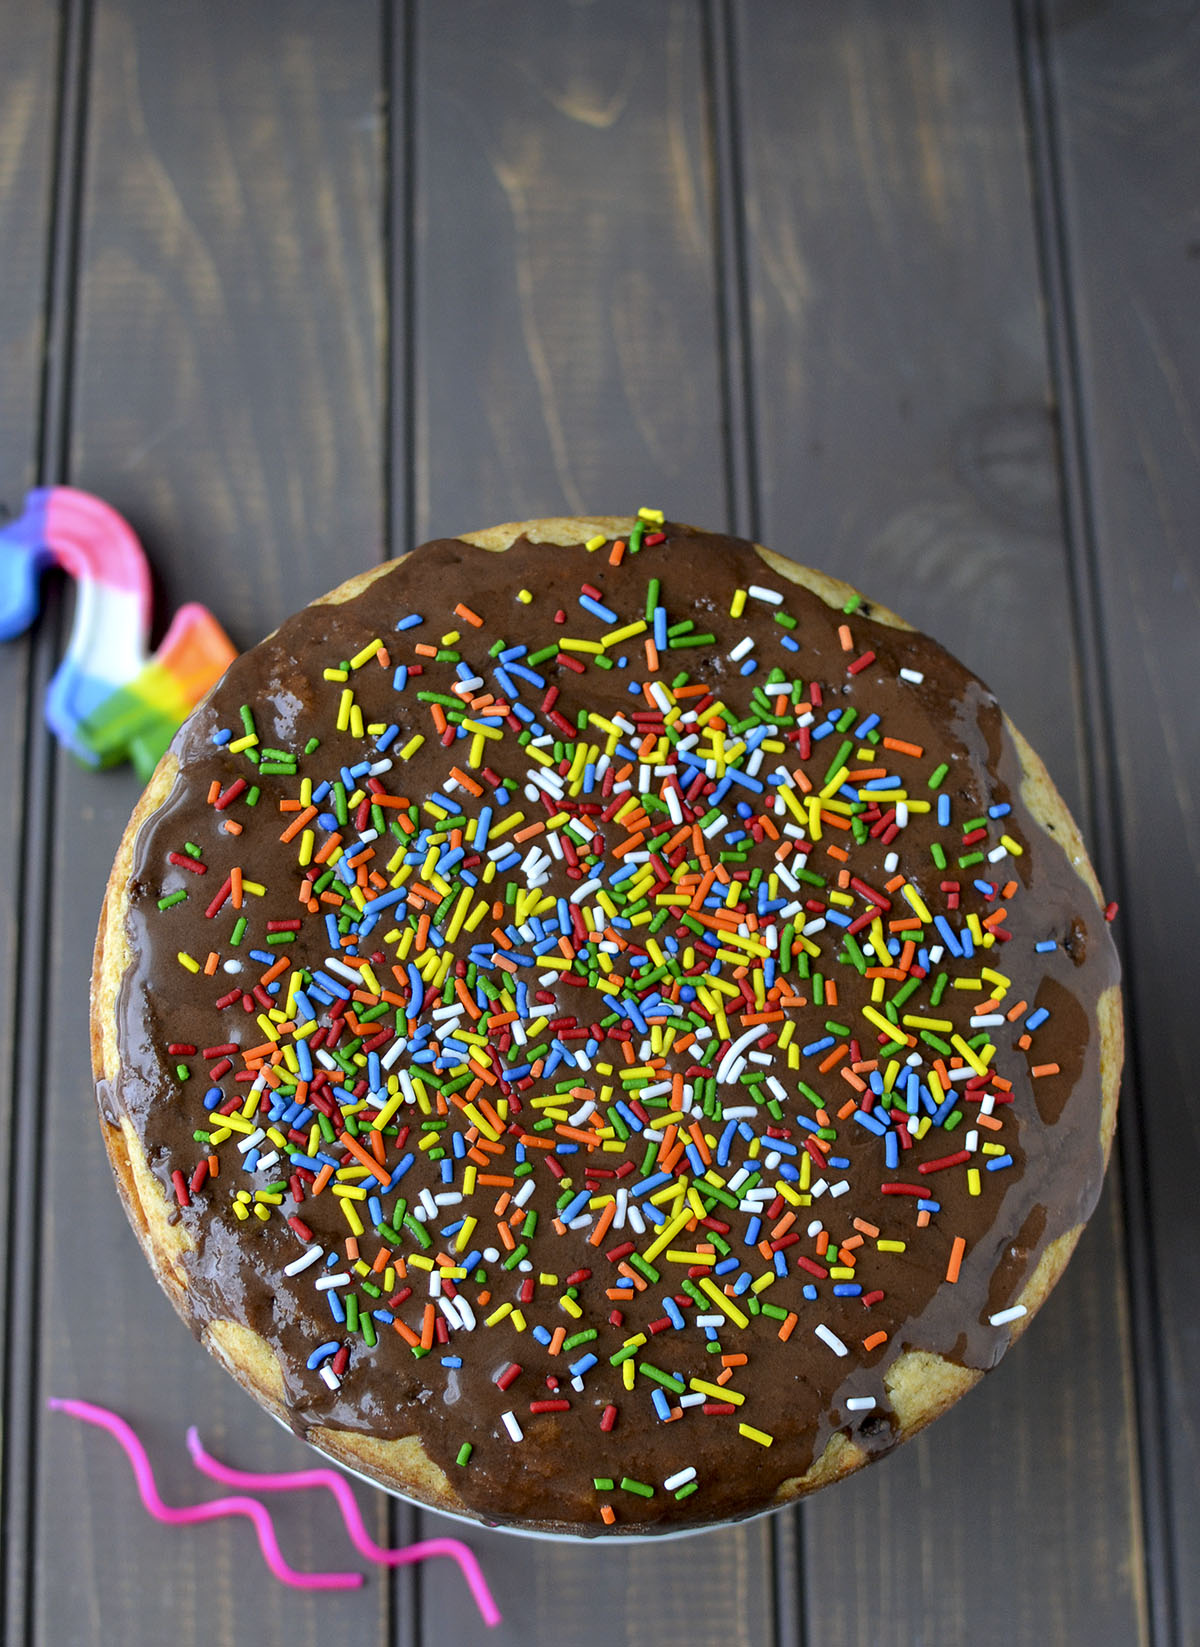 Top view of a cake with chocolate ganache and sprinkles